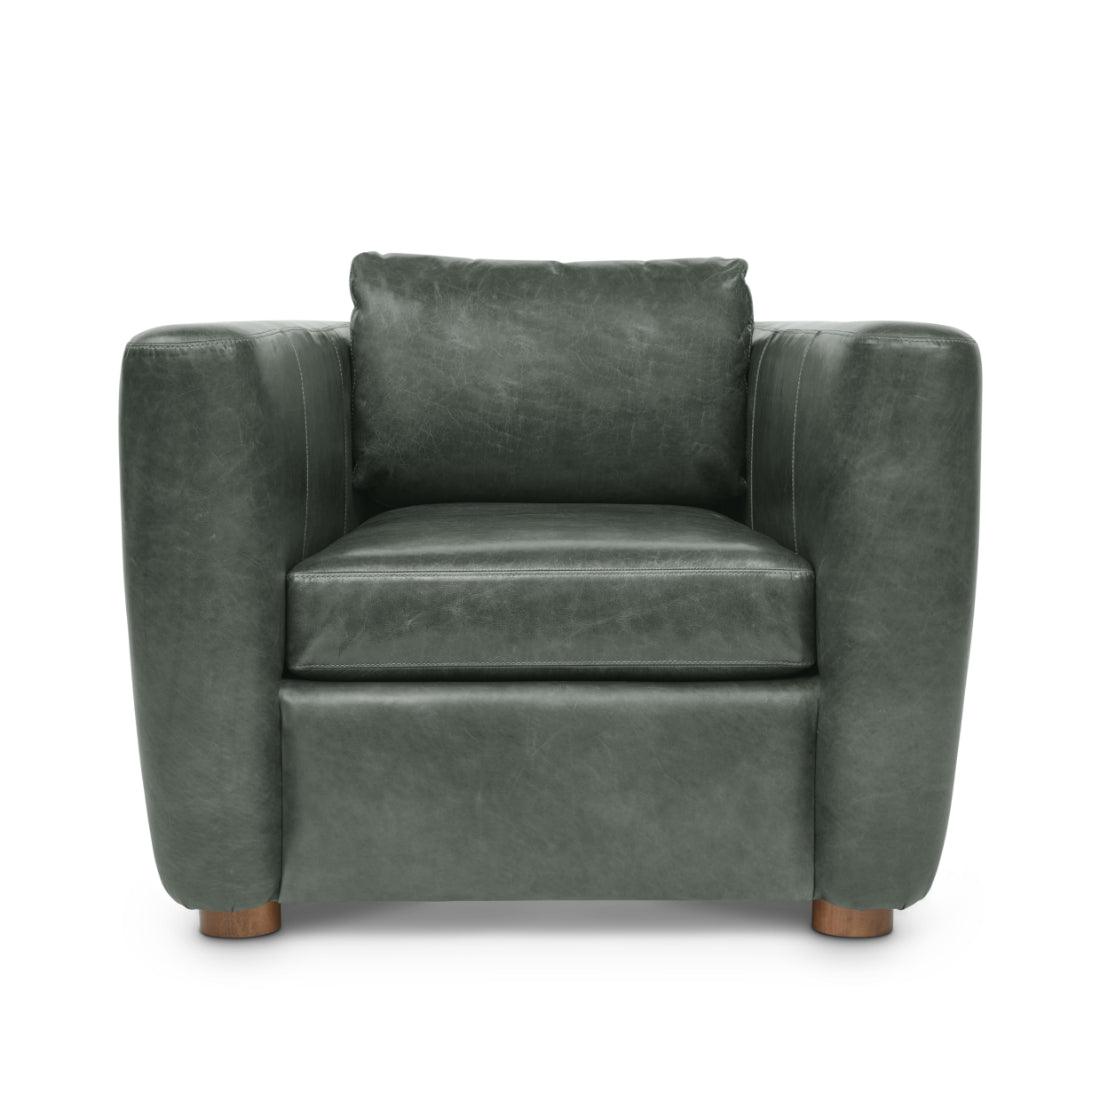 Modern Leather Club Chair Made to Order - Uptown Sebastian